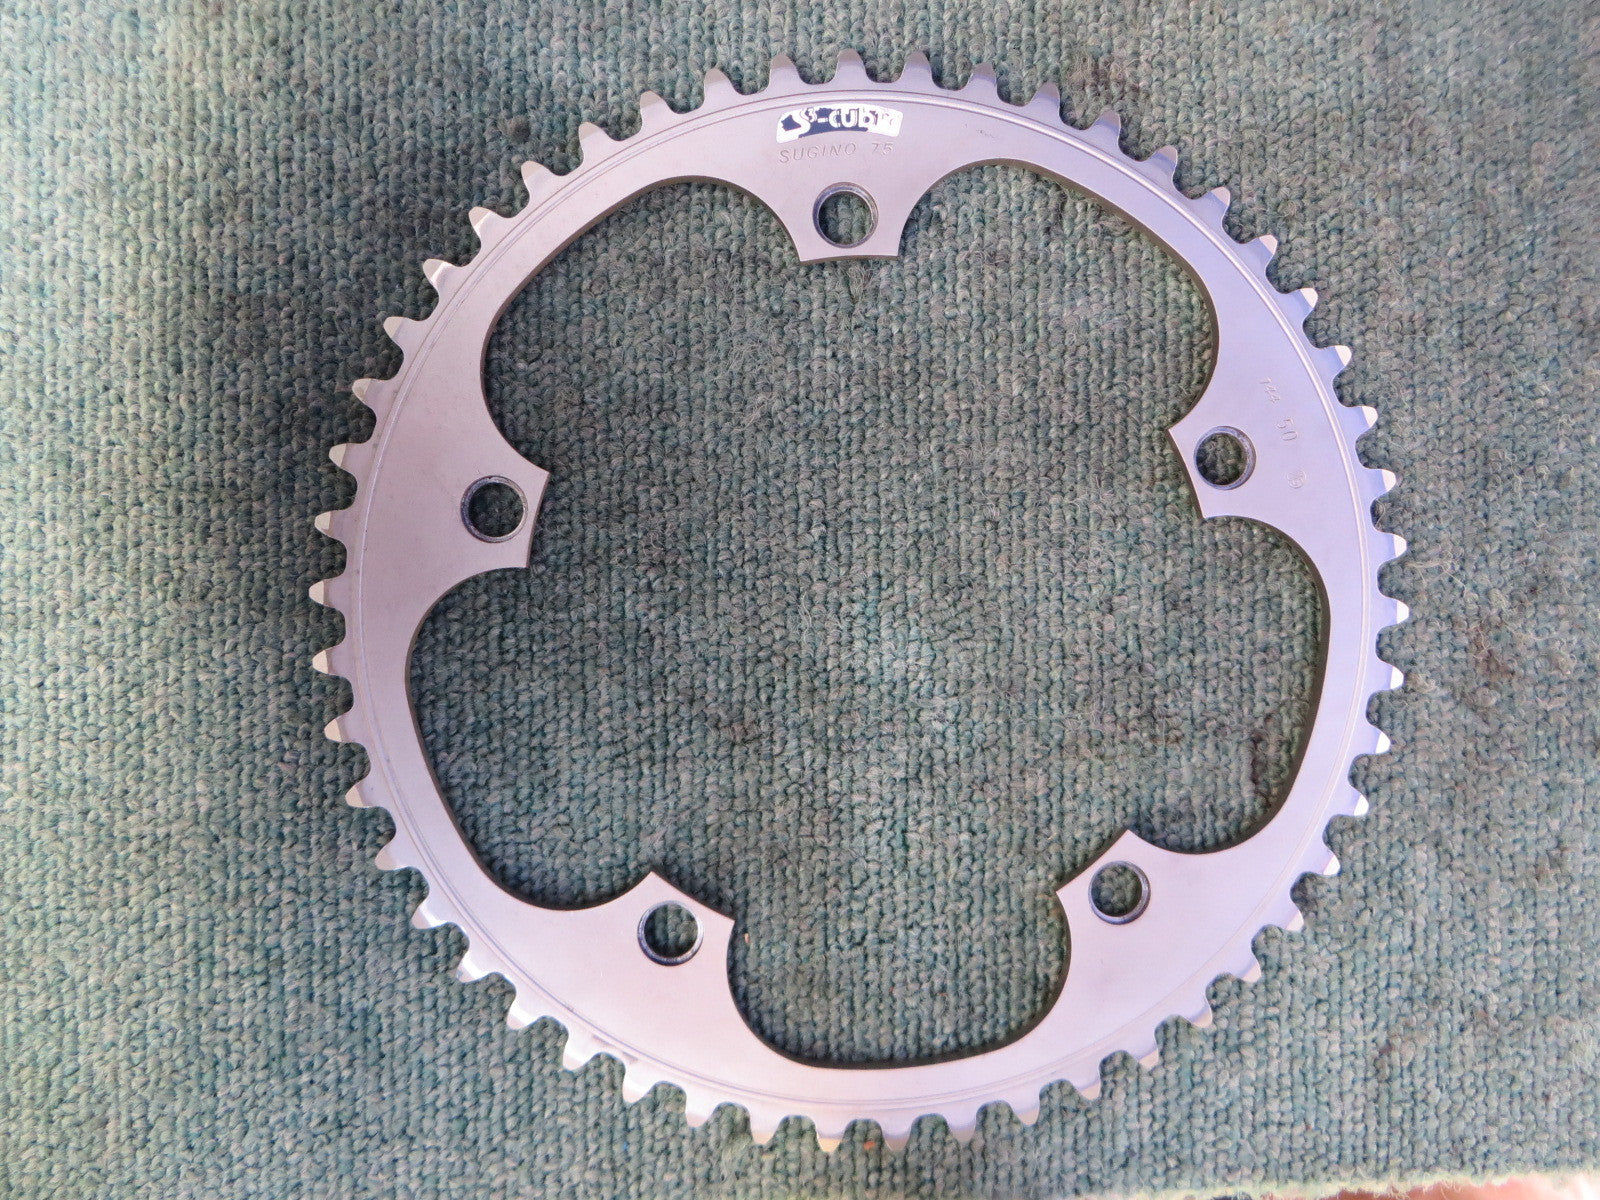 Sugino S-cubic 1/8" Matte Finish 144BCD NJS Chainring 50T (15072114)